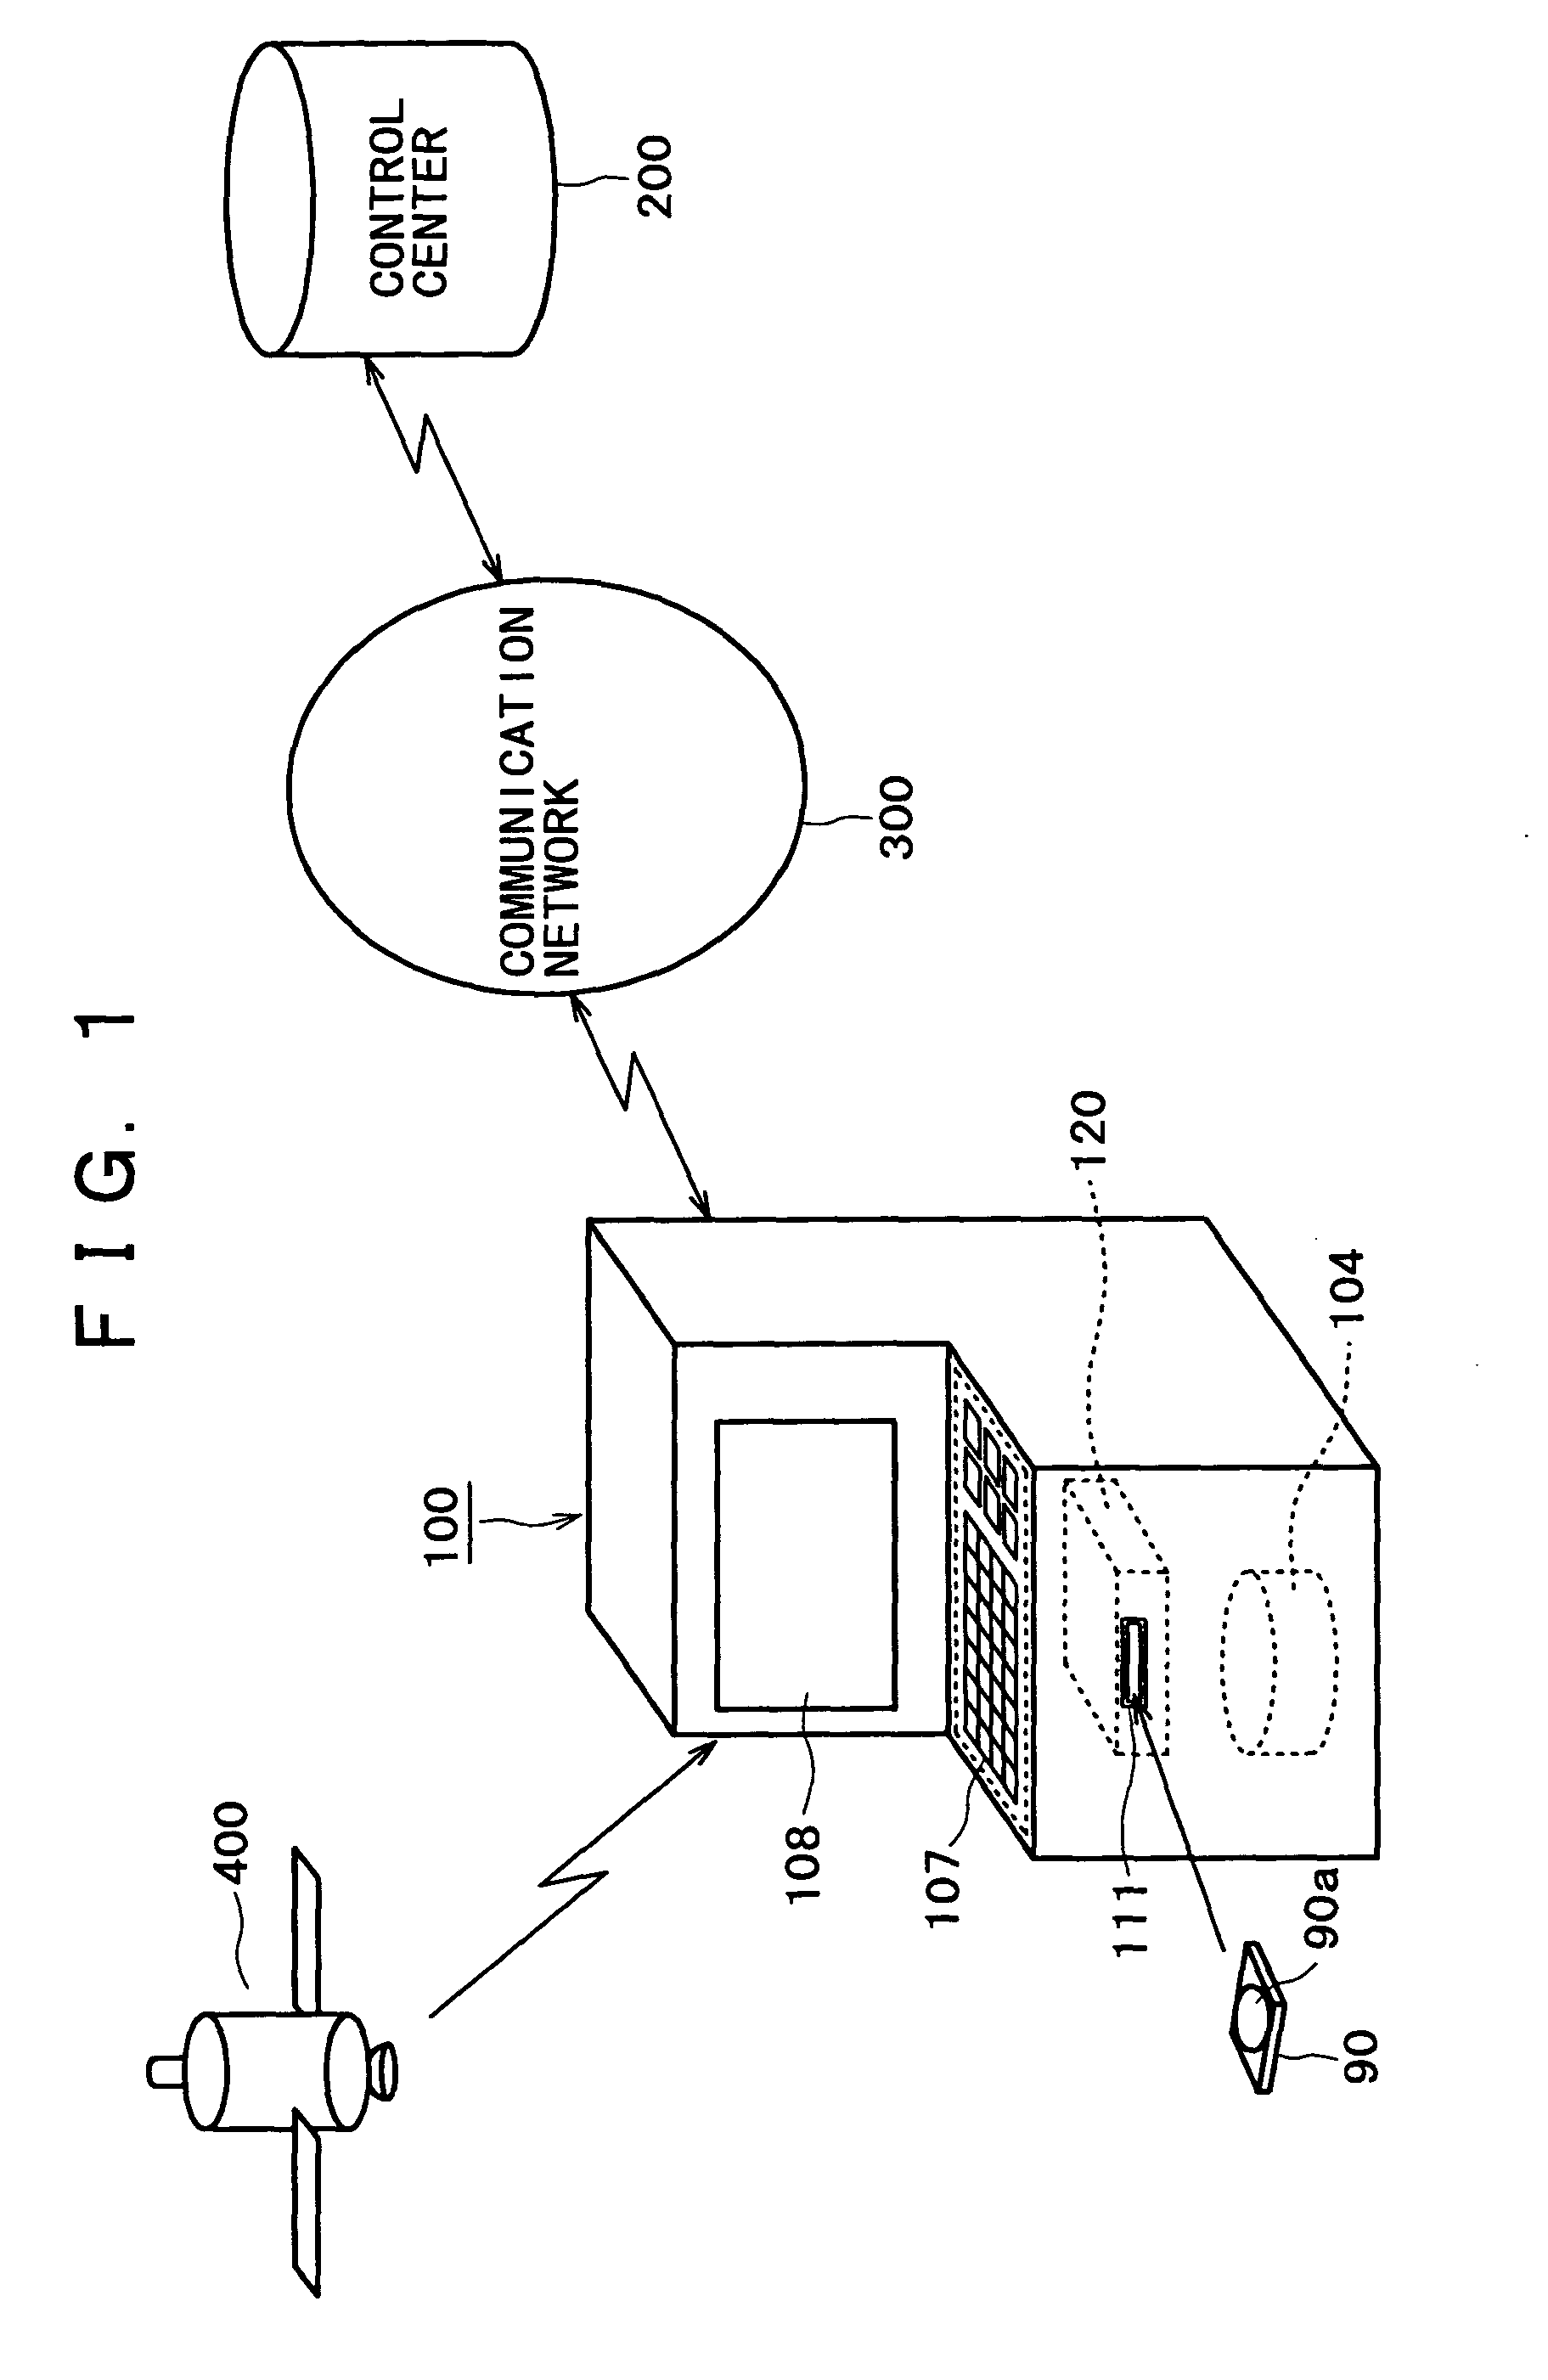 Method and apparatus for controlling the intensity of a laser beam used to record/reproduce data to/from an optical disc